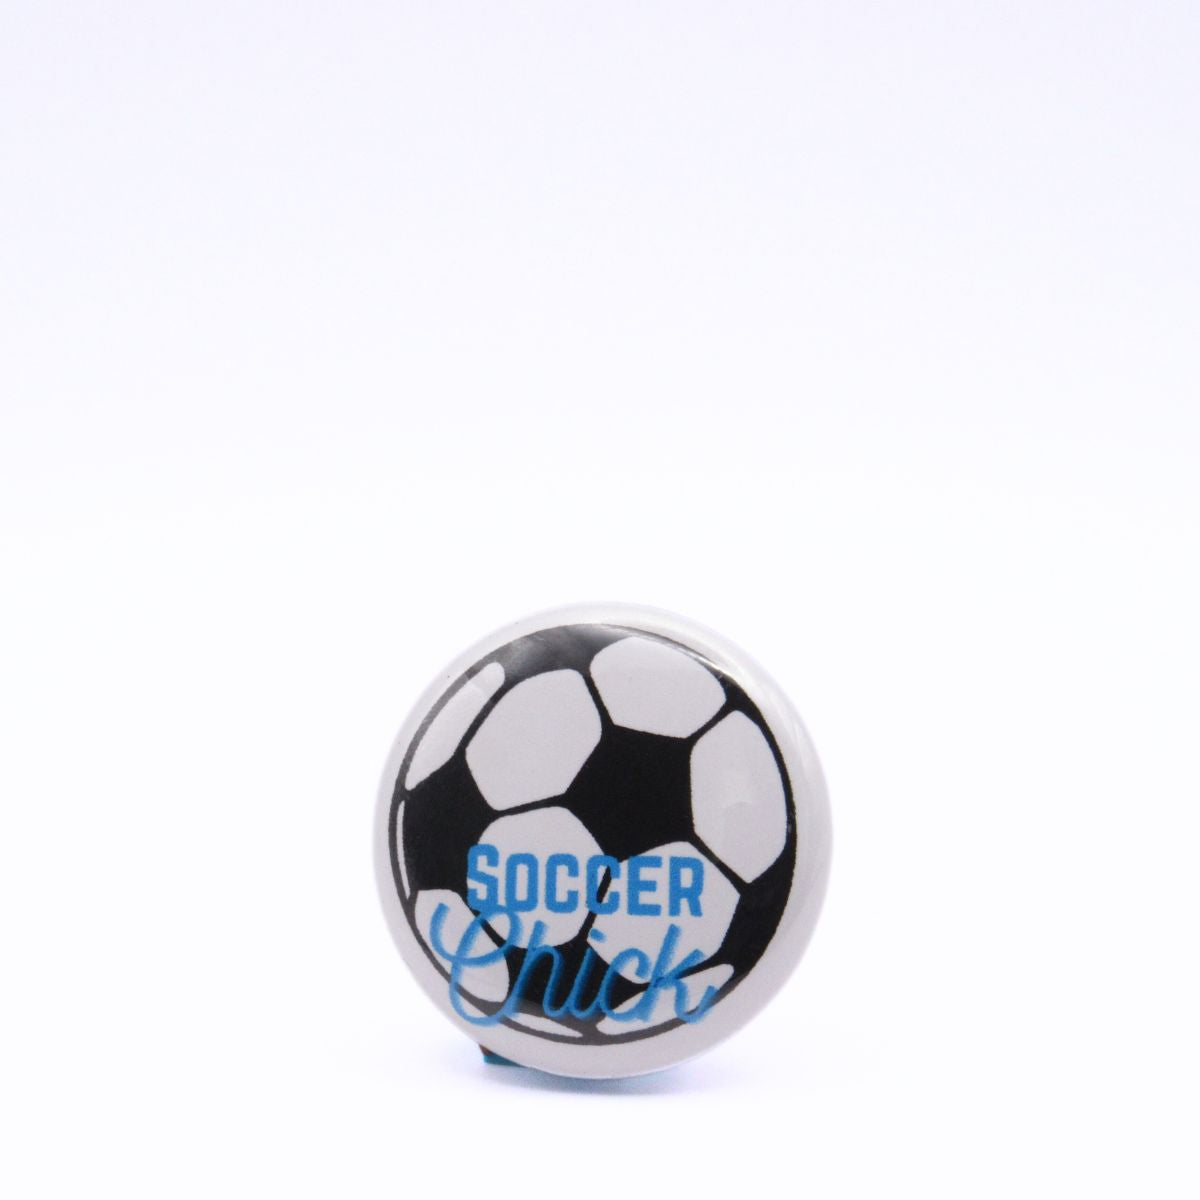 BooBooRoo Pinback Button (i.e. button, badge, pin) displaying a soccer ball and the words, "Soccer Chick." Black soccer ball with blue text.